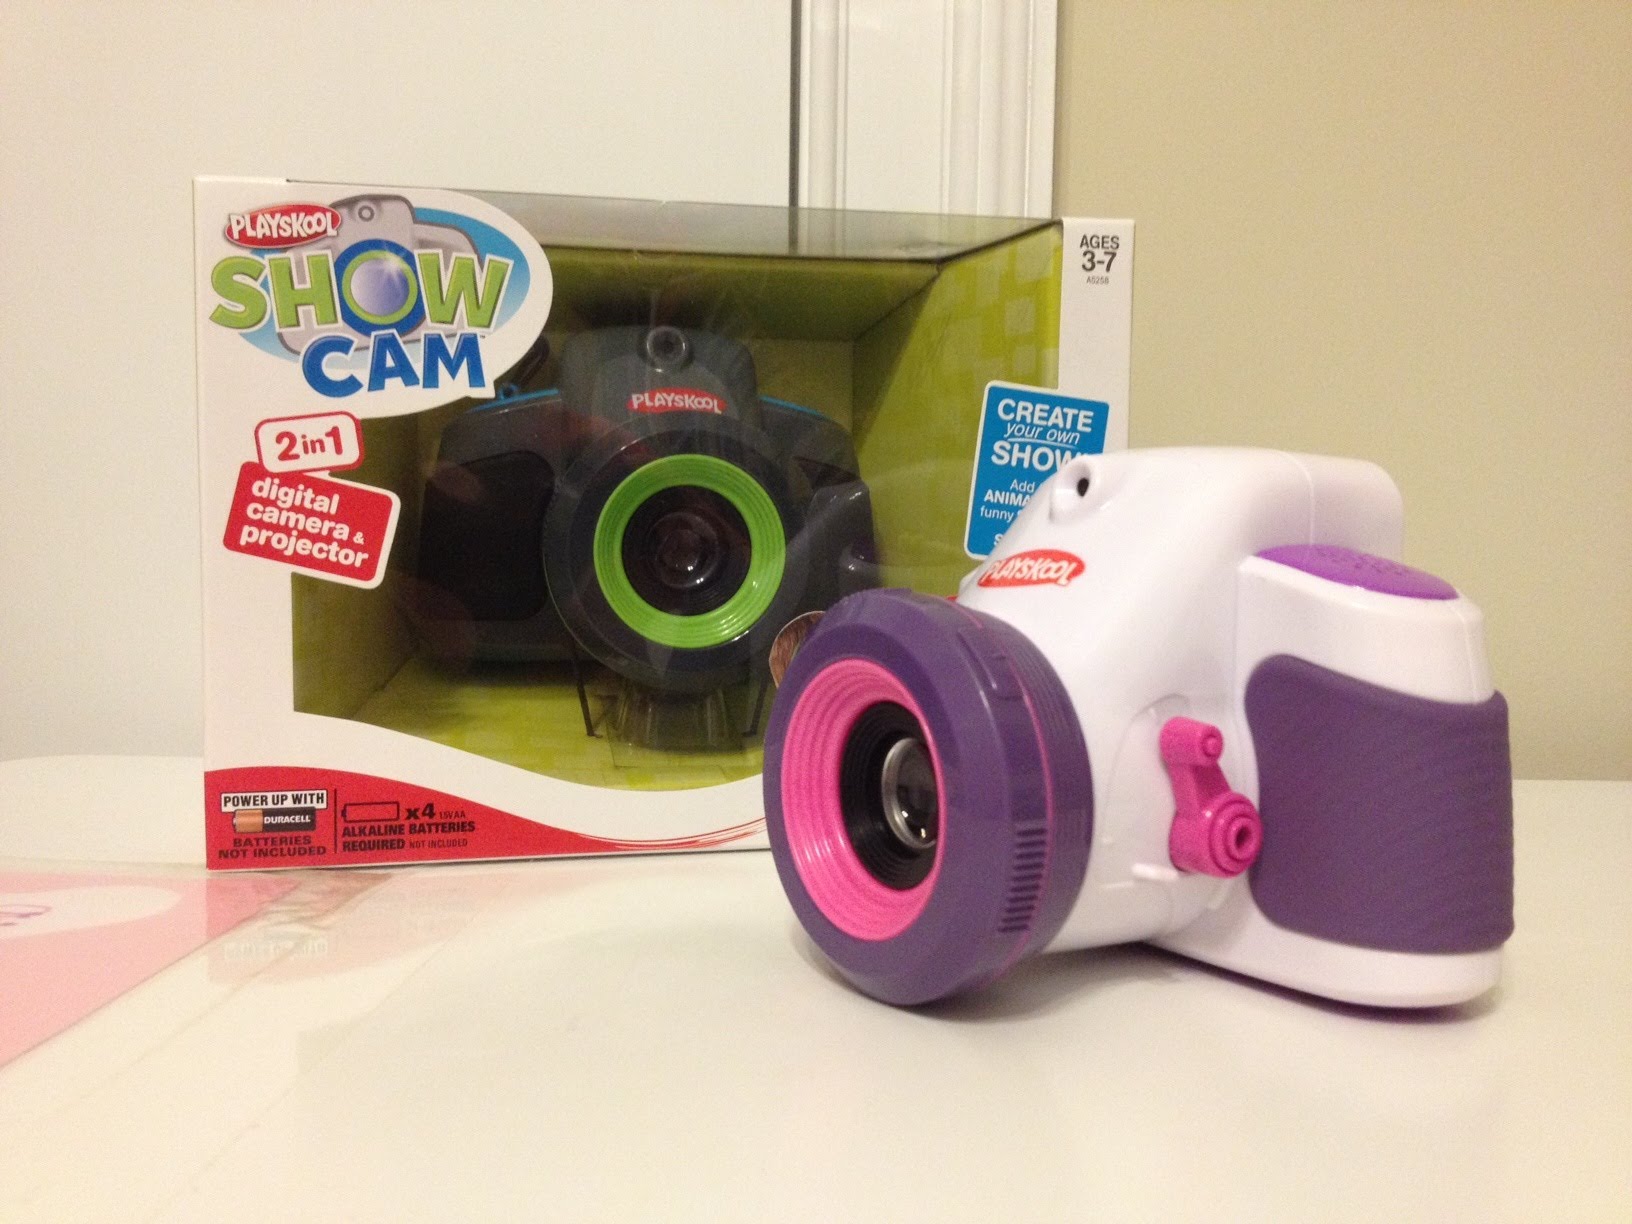 Playskool Showcam 2 in 1 Digital Camera and Projector The_Engineering_Family